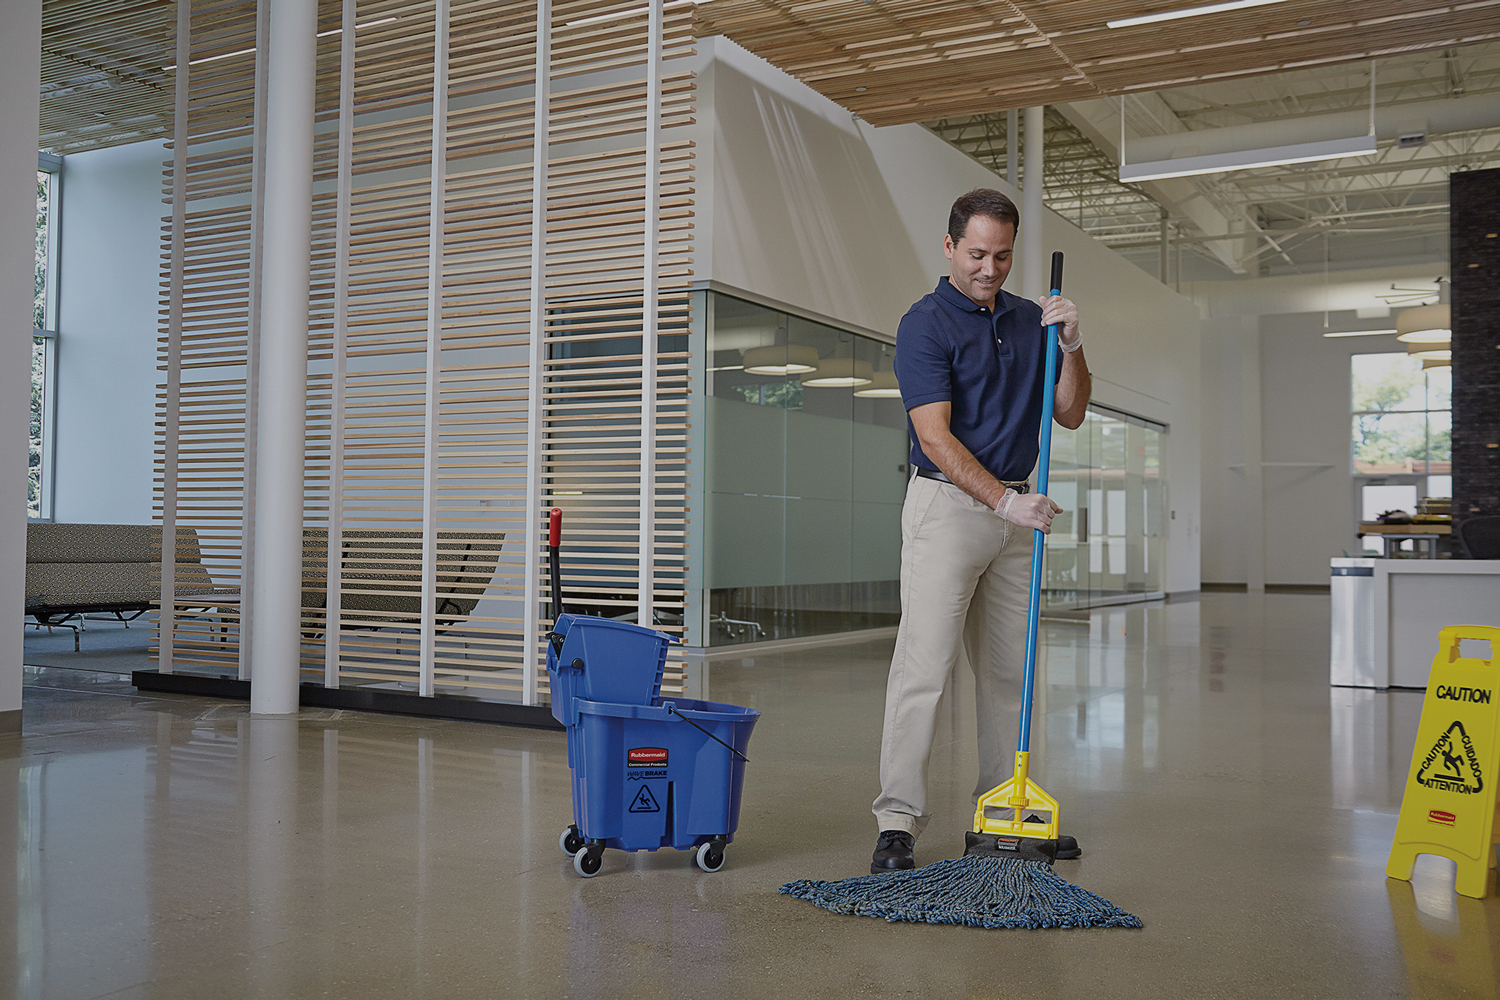 SUPPLY - Patriot USA Commercial Cleaning Janitorial Service